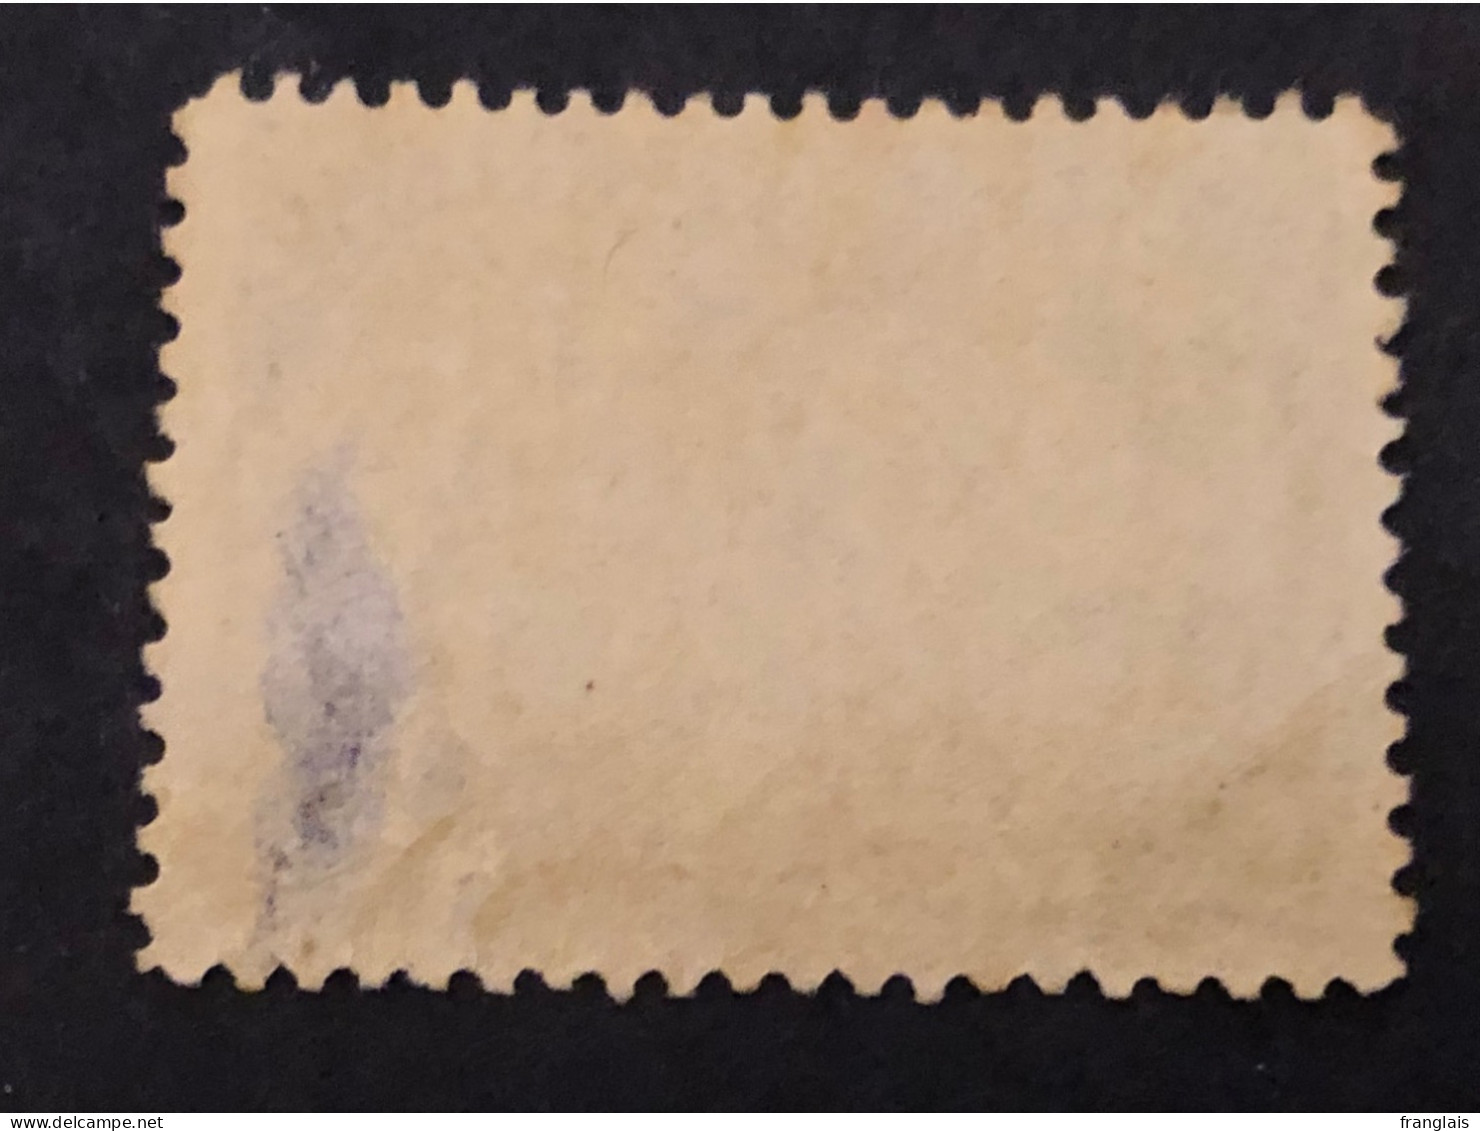 Sc 57 SG 131 Jubilee Issue Of 1897 10 Cent Violet MNH** But With A Thin / Aminci CV £90 - Ongebruikt